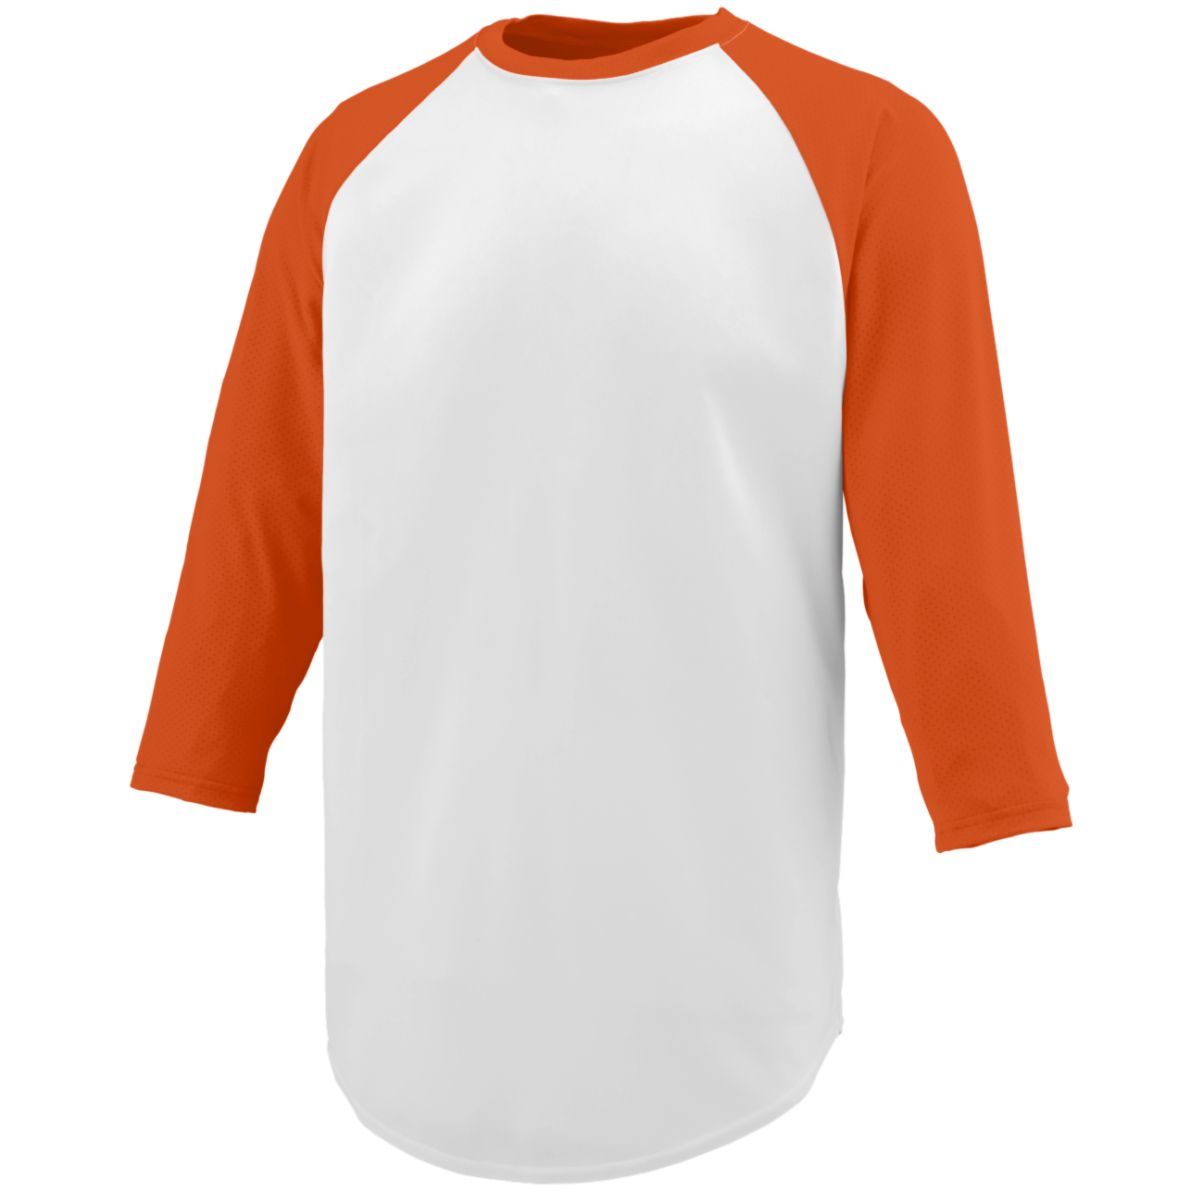 Augusta Sportswear Nova Jersey in White/Orange  -Part of the Adult, Adult-Jersey, Augusta-Products, Baseball, Shirts, All-Sports, All-Sports-1 product lines at KanaleyCreations.com